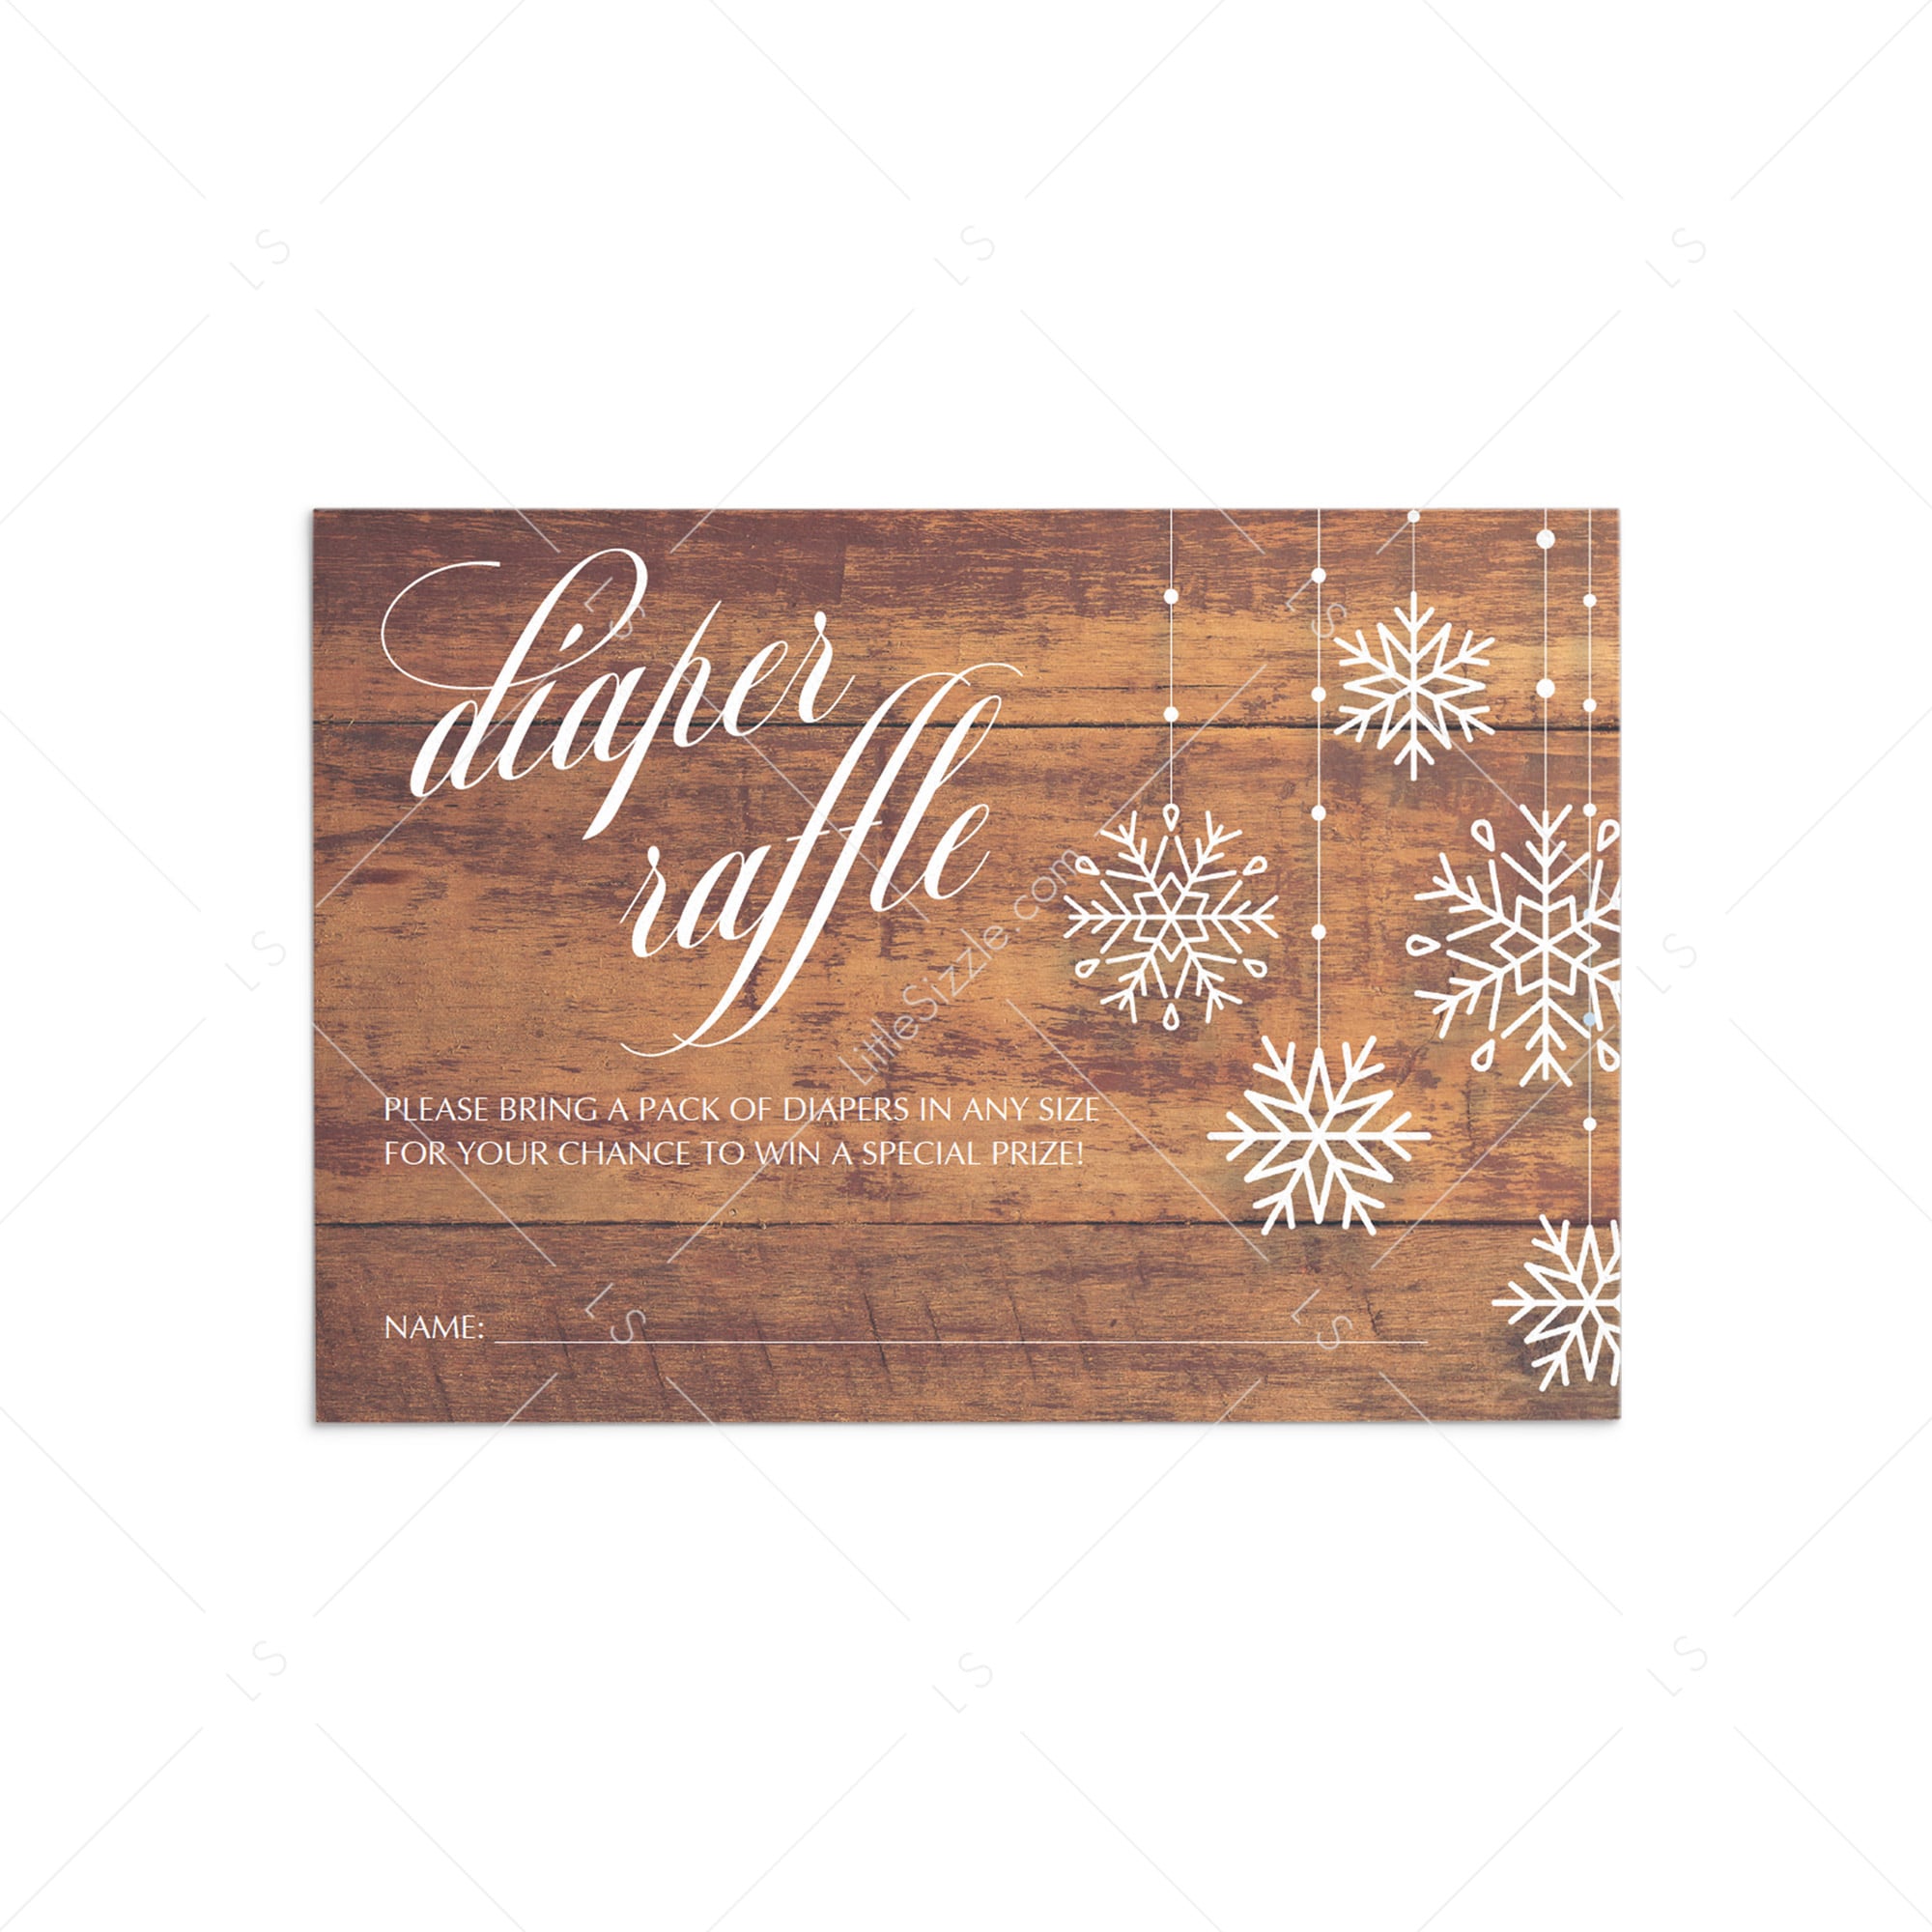 Diaper raffle cards for winter baby shower by LittleSizzle